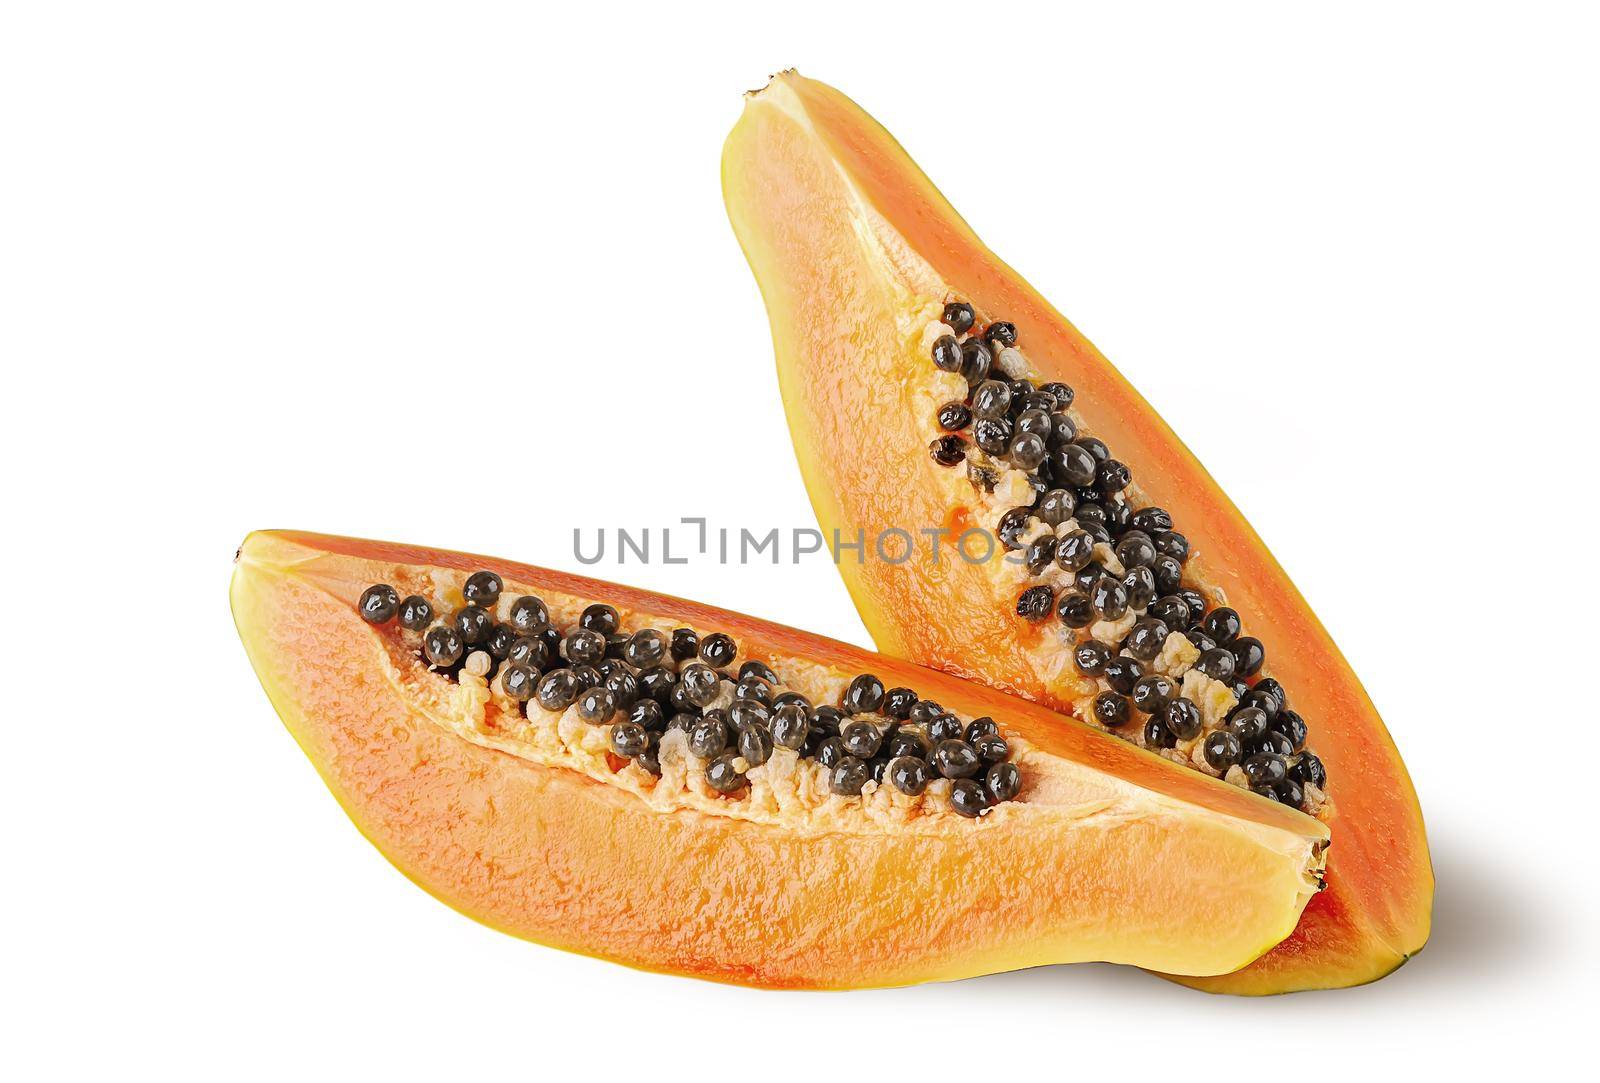 Two quarters of ripe papaya one after another by Cipariss